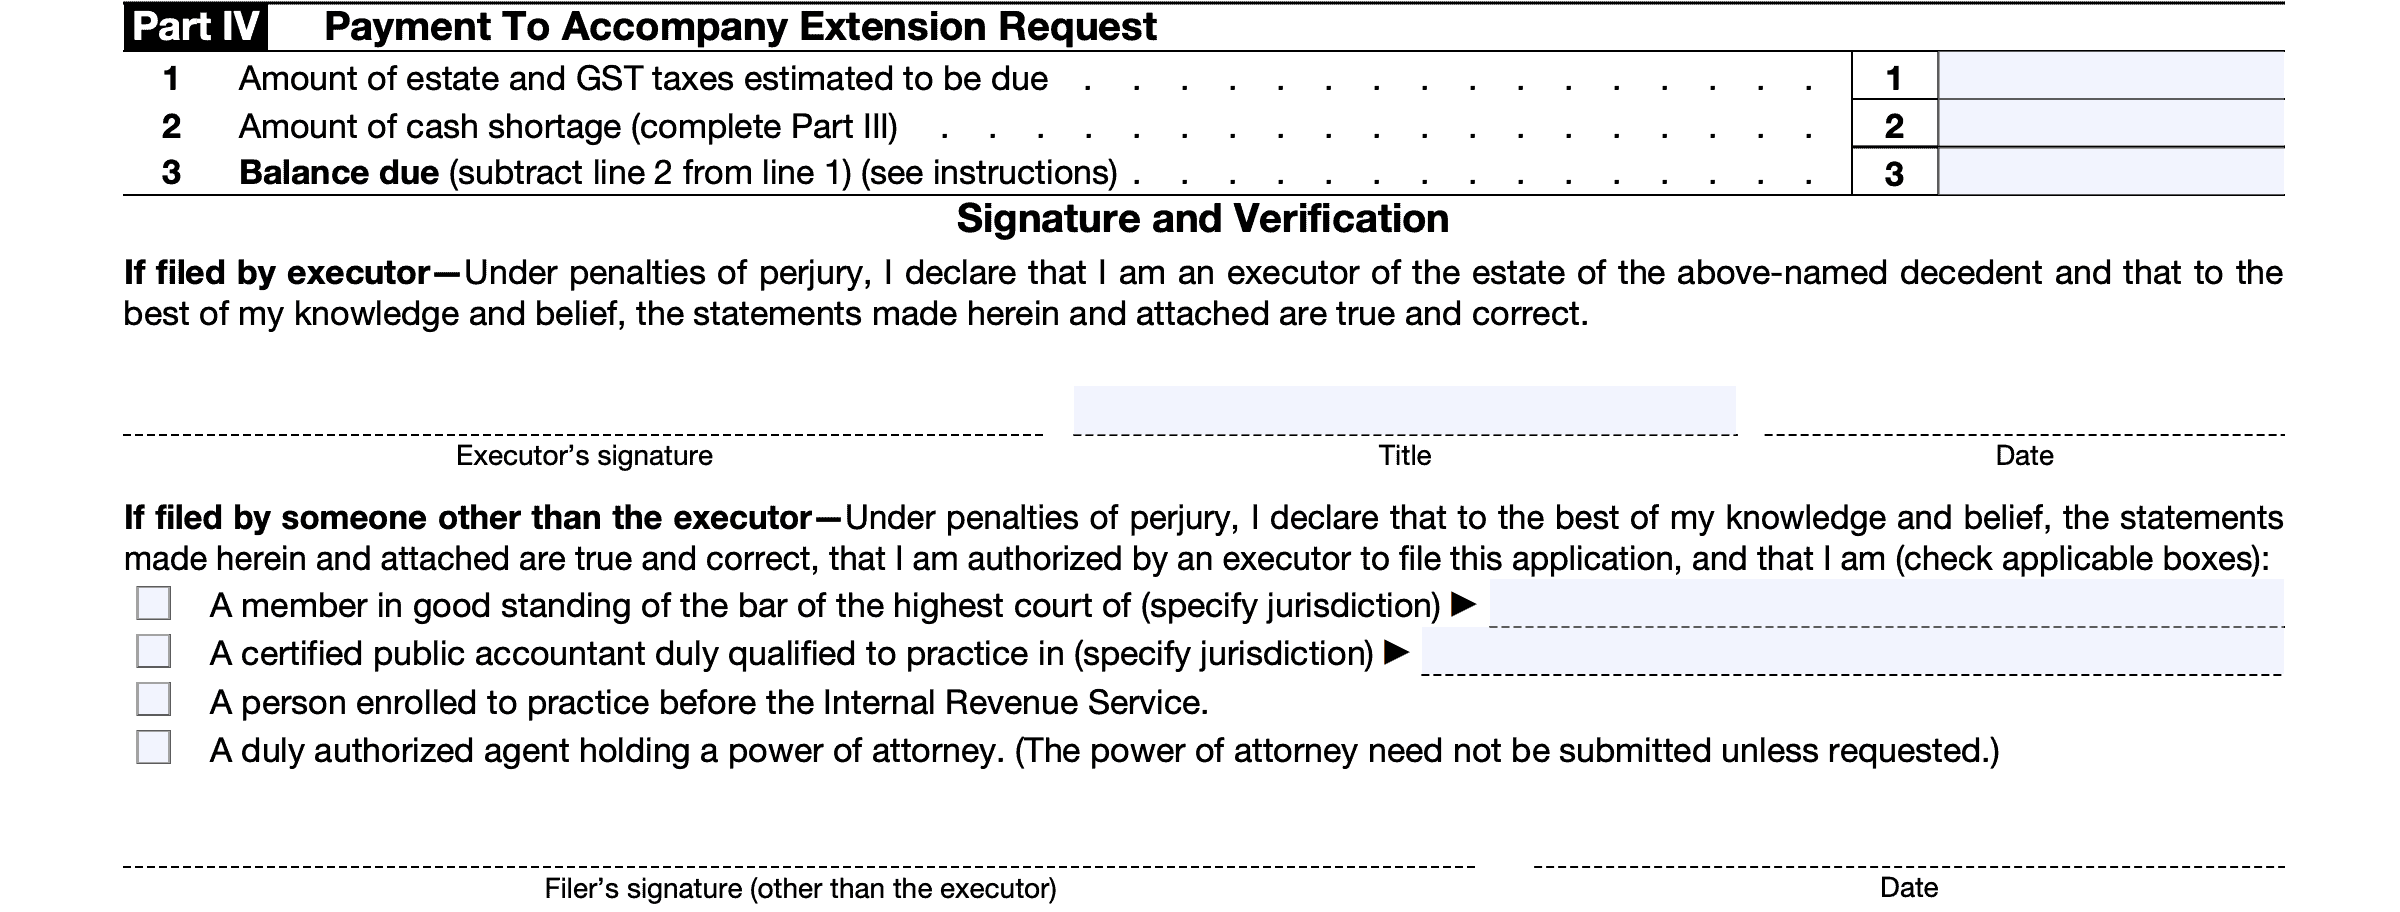 irs form 4768, part iv, payment to accompany extension request